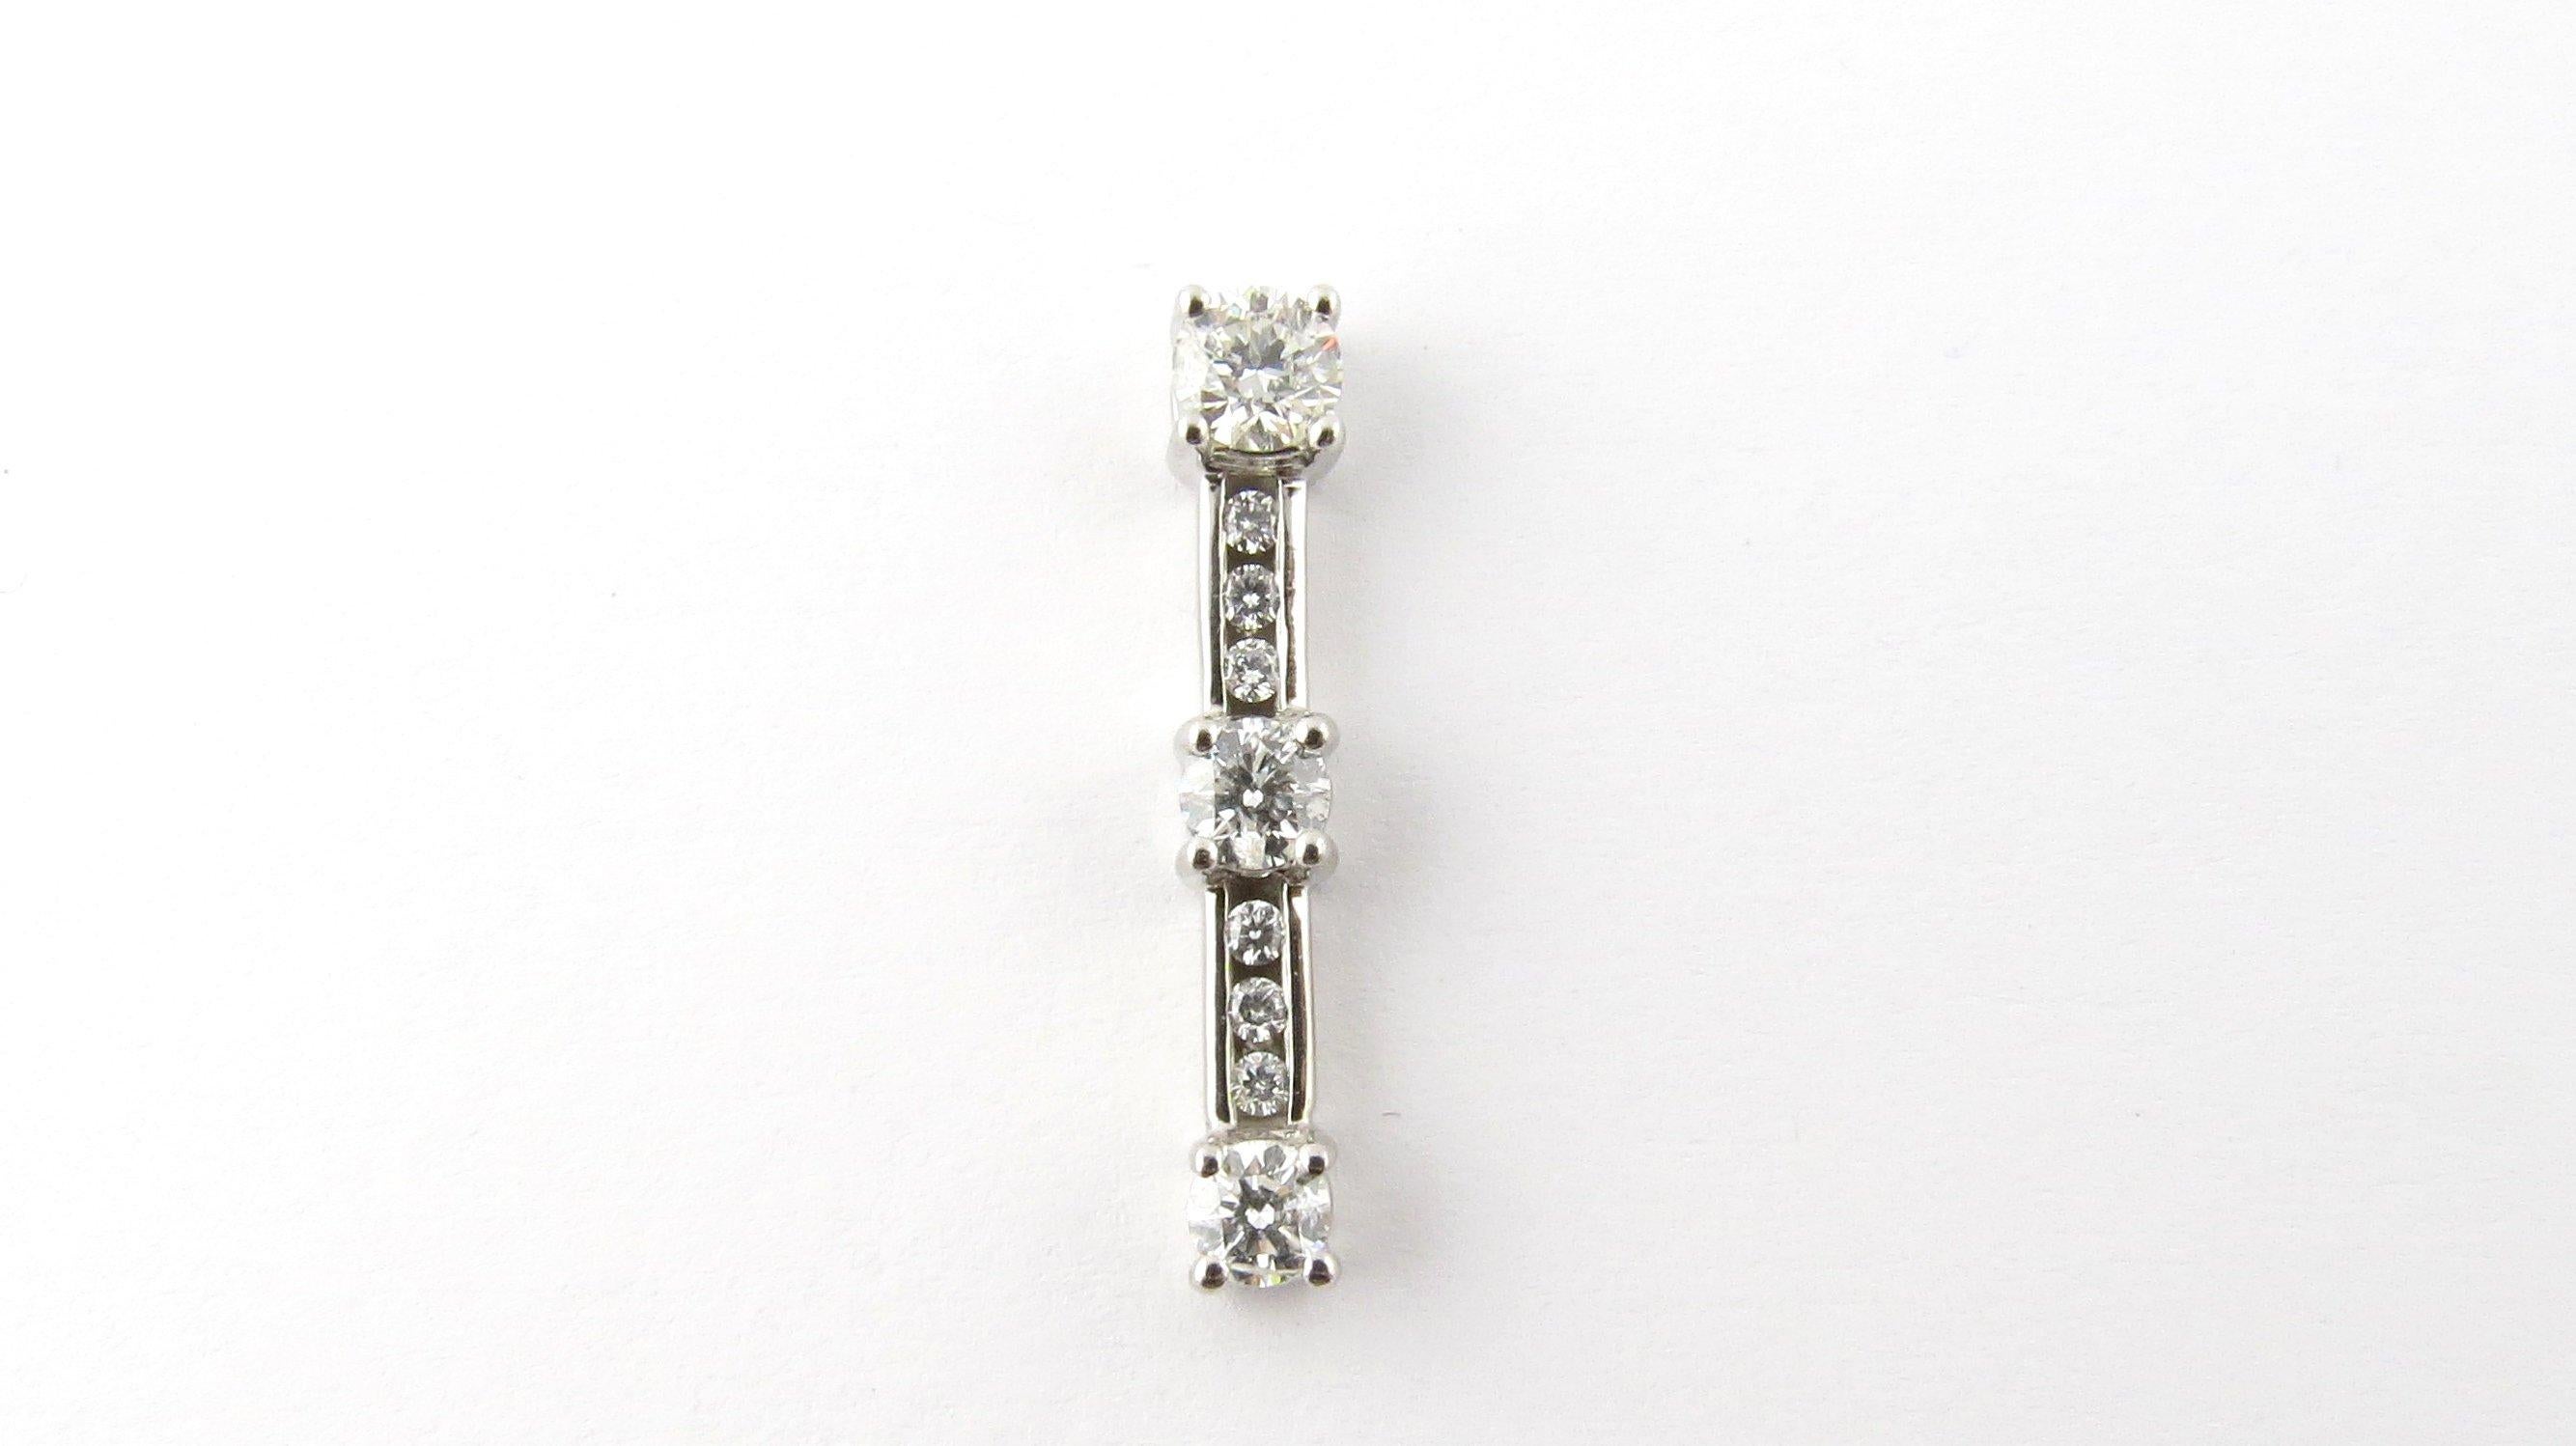 Past Present Future Keepsake 14k Gold Pendant with Diamonds

The pendant measures approx 3 mm x 4 mm x 25 mm.

14k white gold pendant with .72 carats of round brilliant diamonds, I1, H.

This pendant features 1 small diamond .15 cts and measures